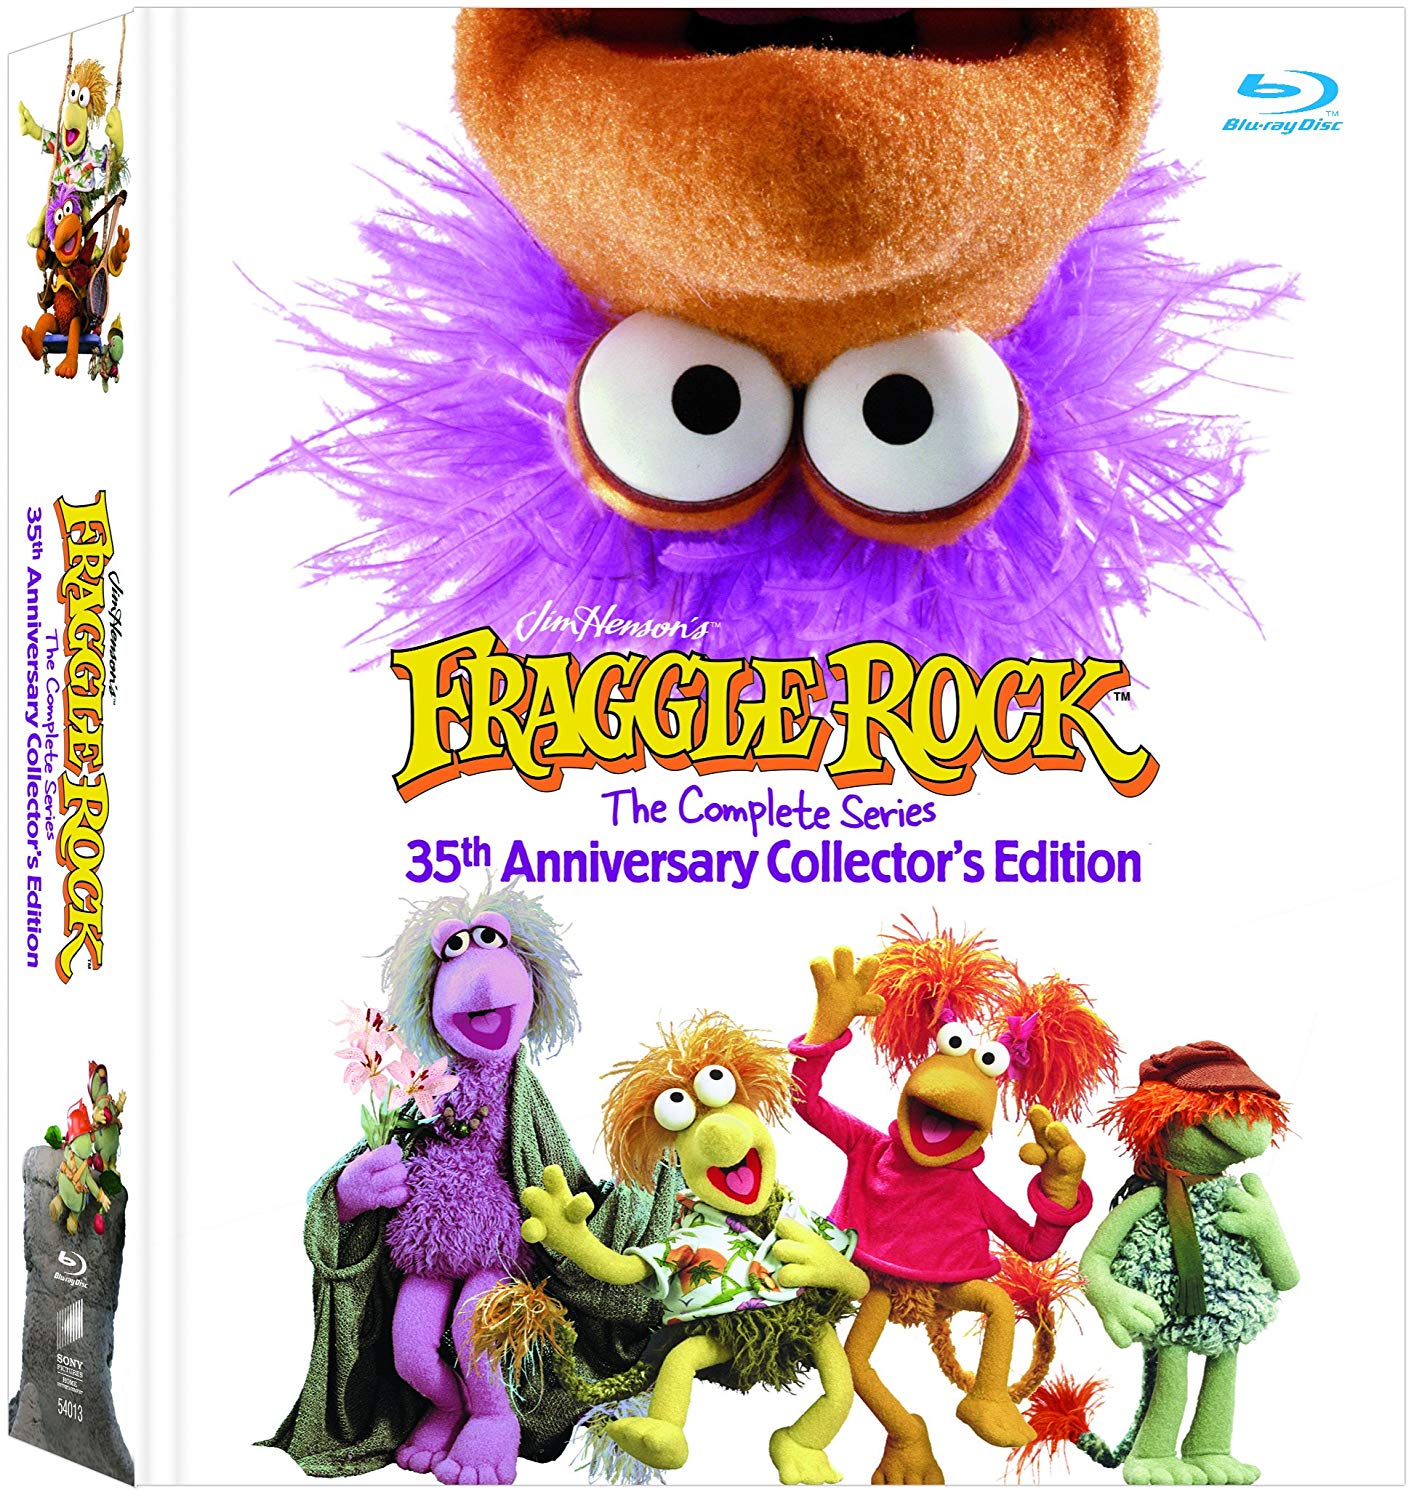 The Best of Jim Henson's Fraggle Rock - Compilation by Fraggle